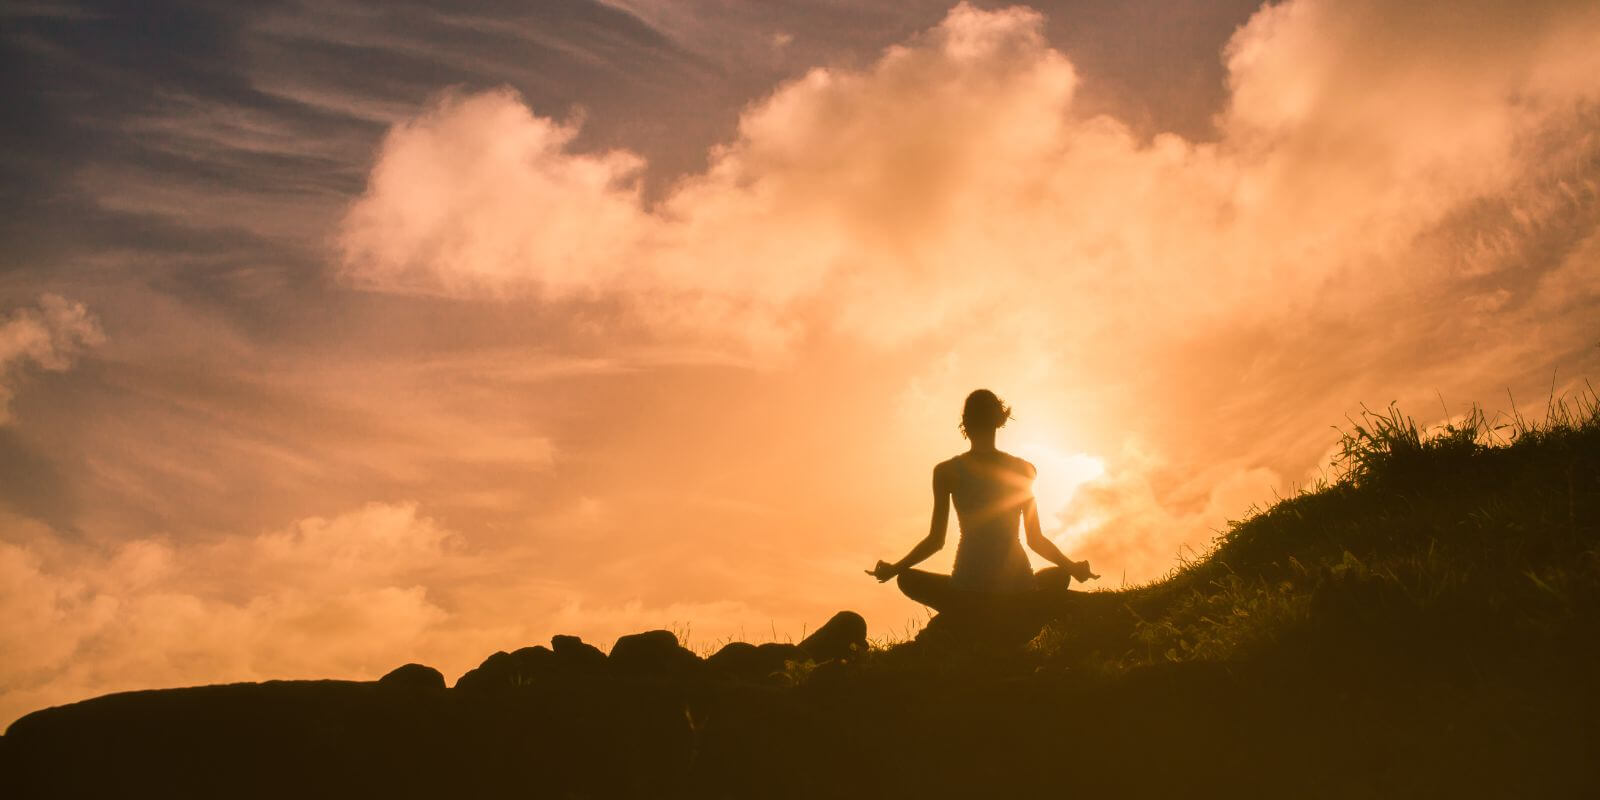 Misconceptions About Meditation, According to Experts